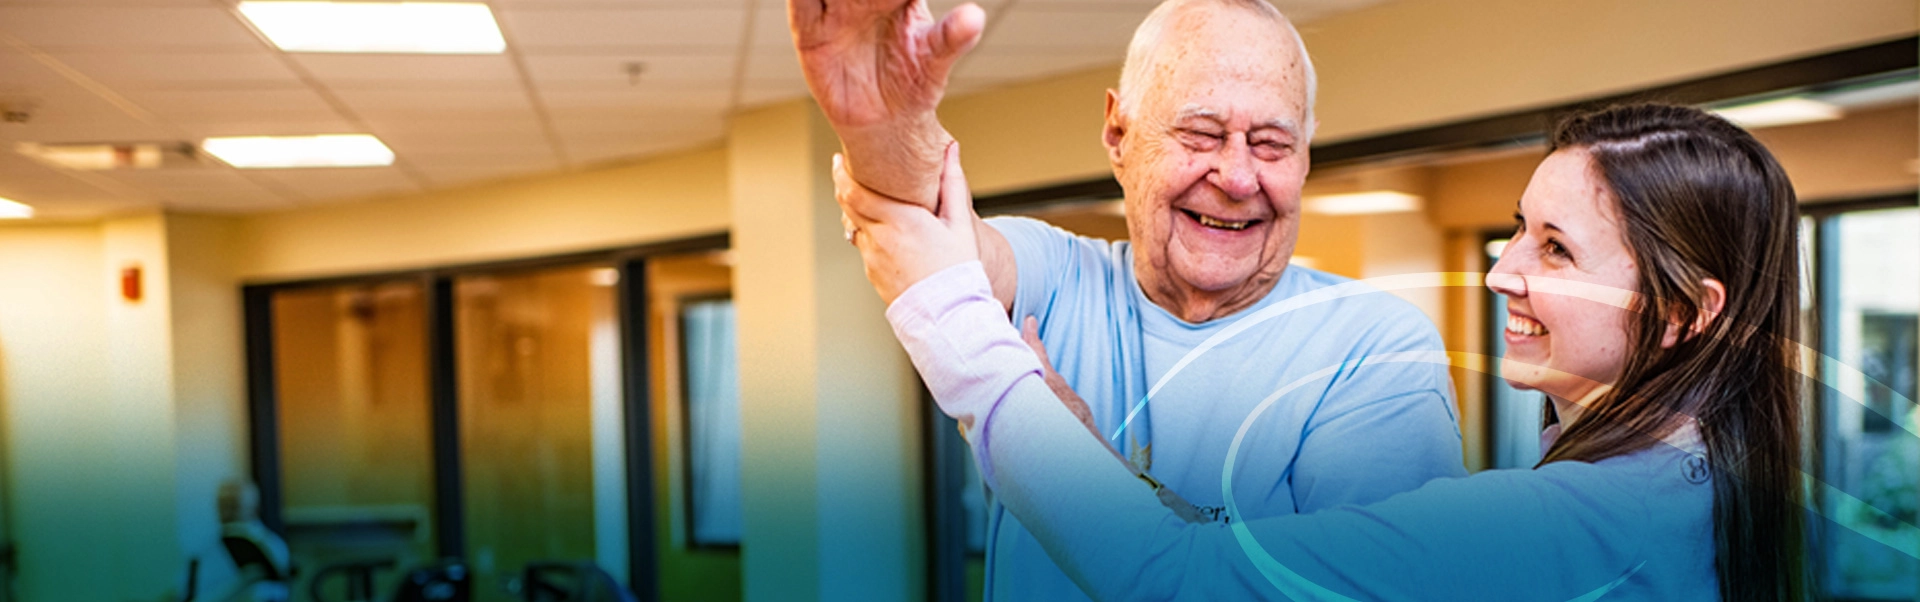 Trainer assisting elderly man with stretches at gym in rehab facility